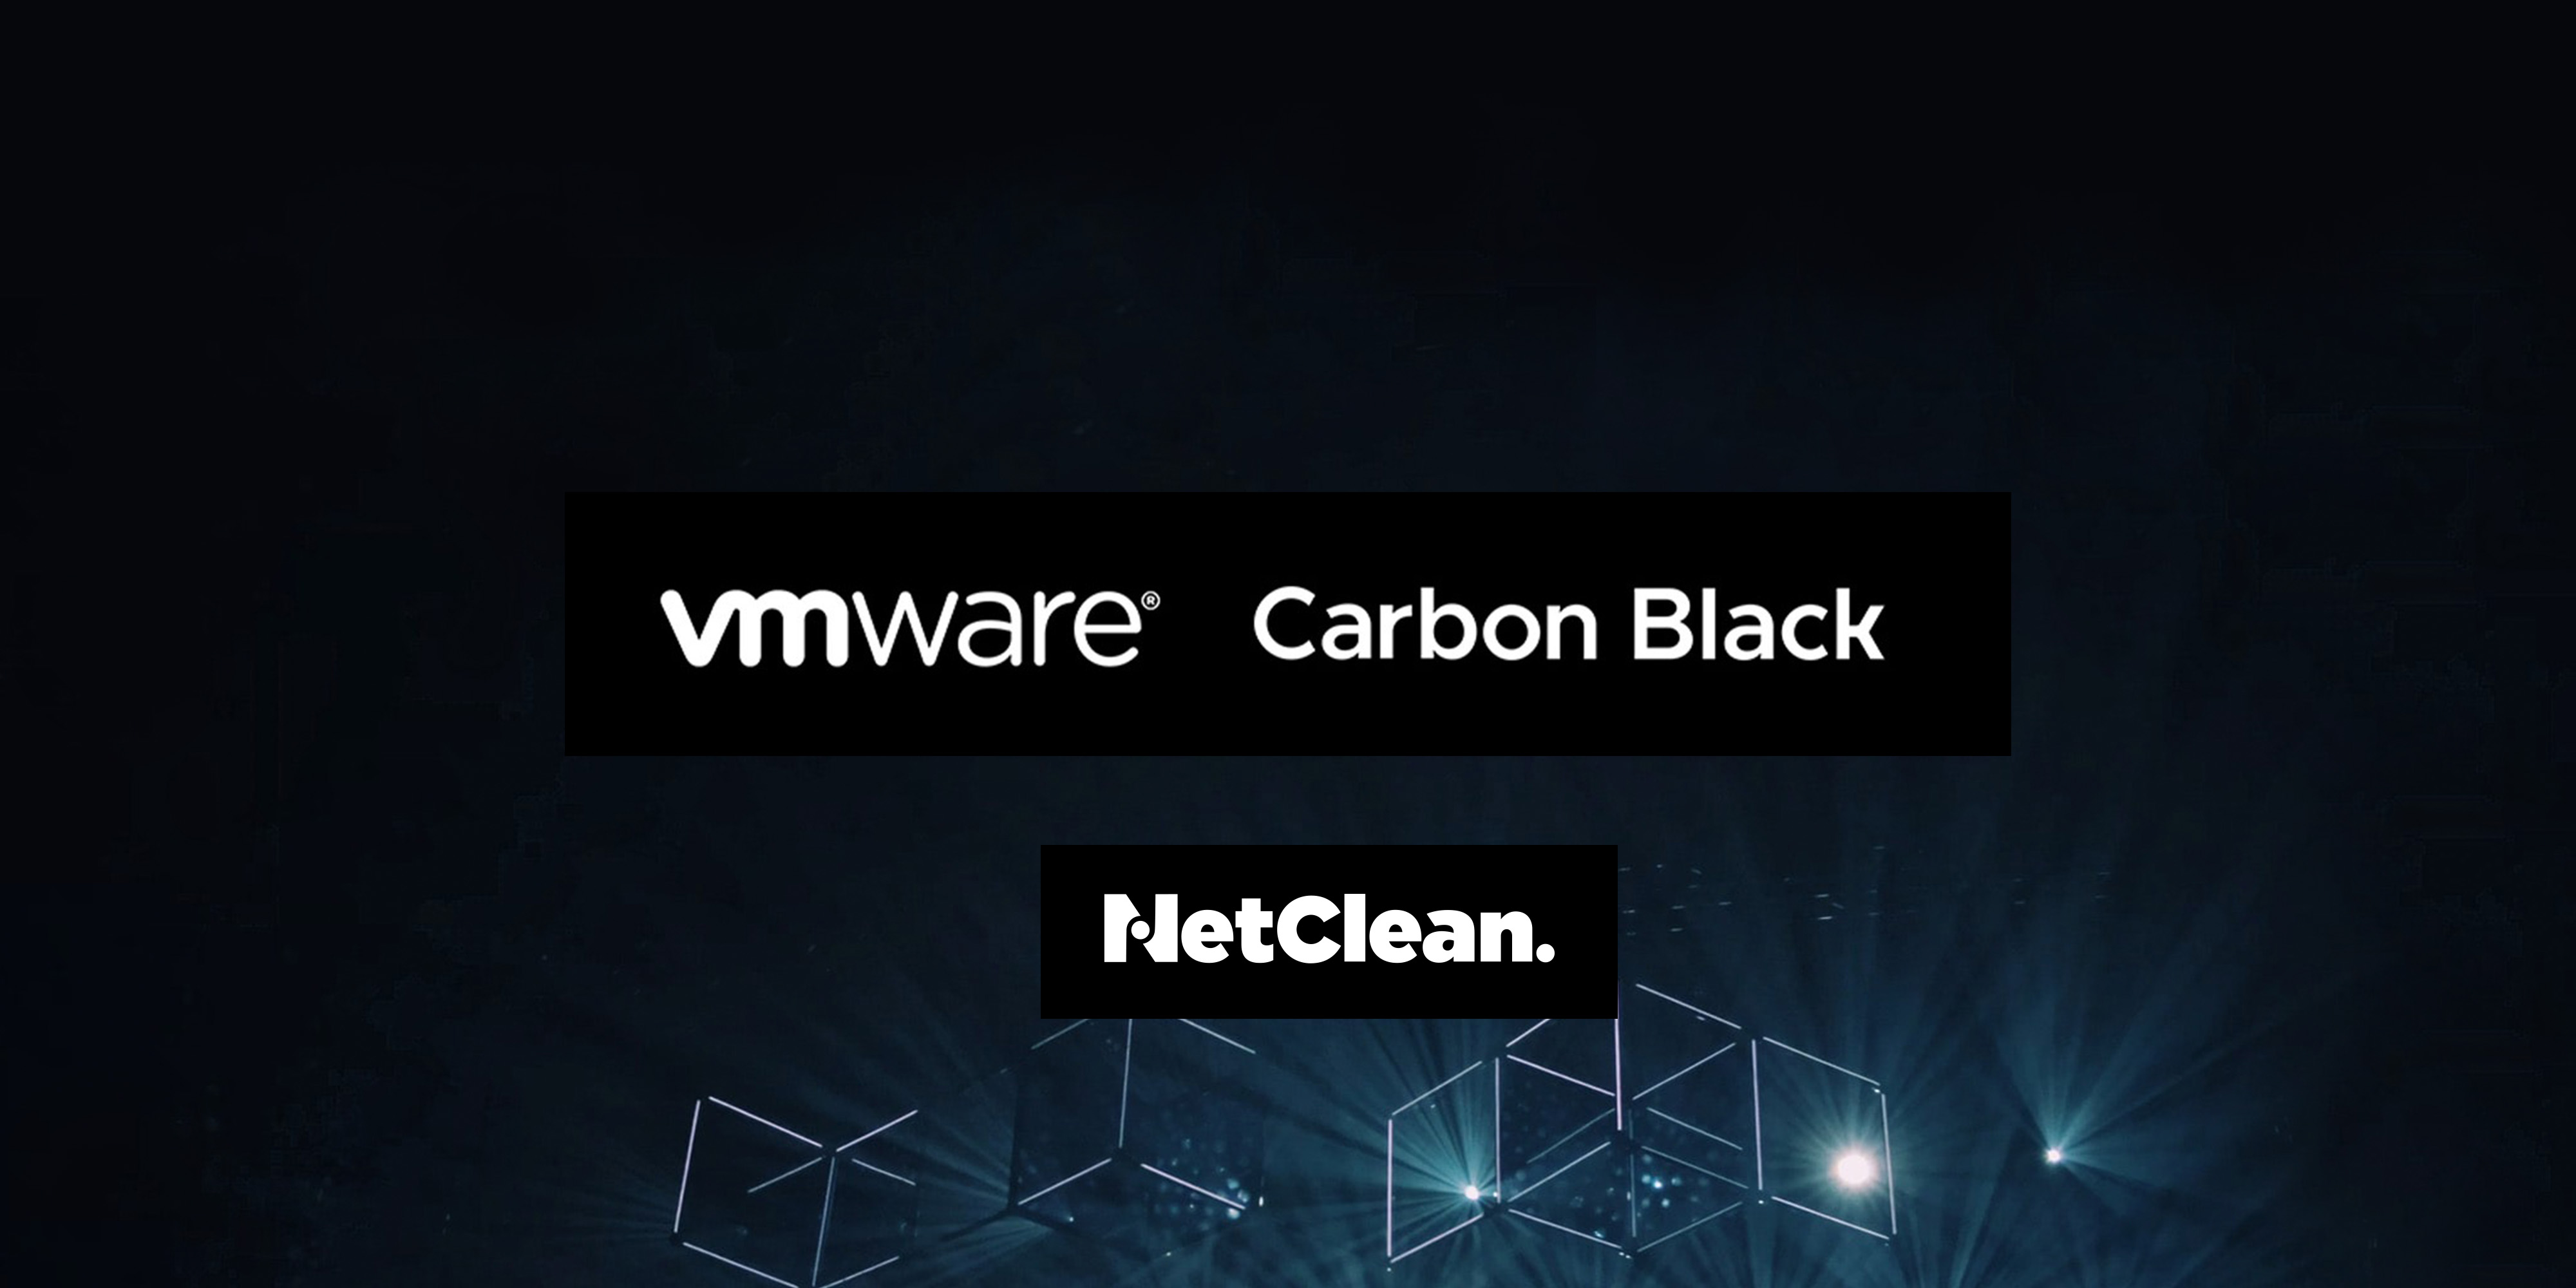 vmware carbon black and netclean logos